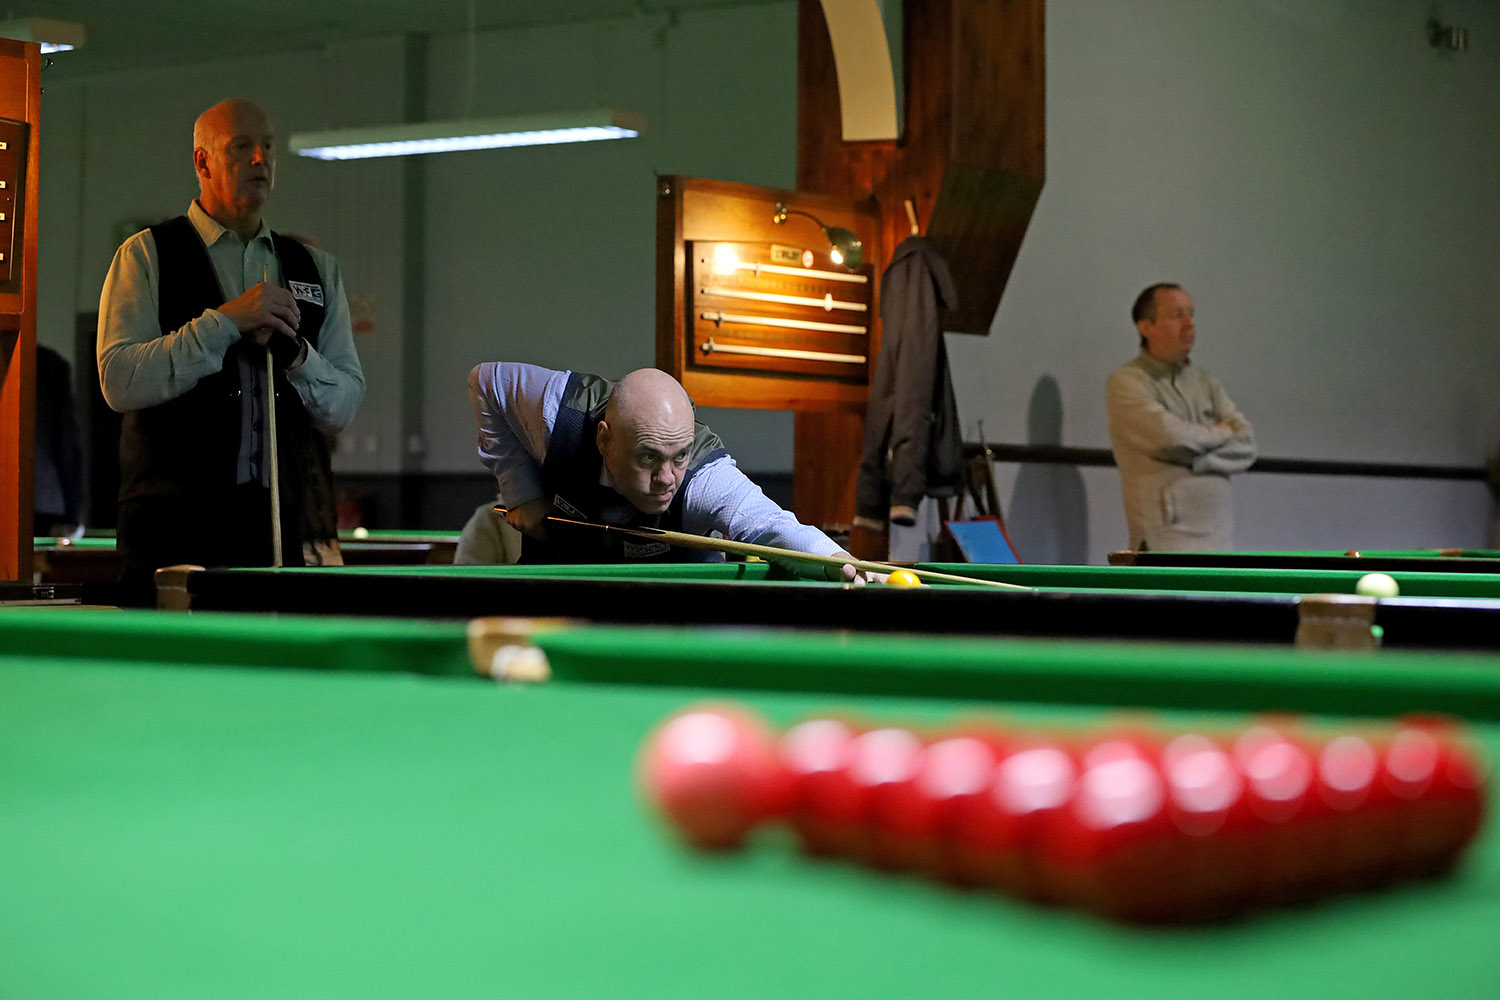 Man plays snooker while other watches